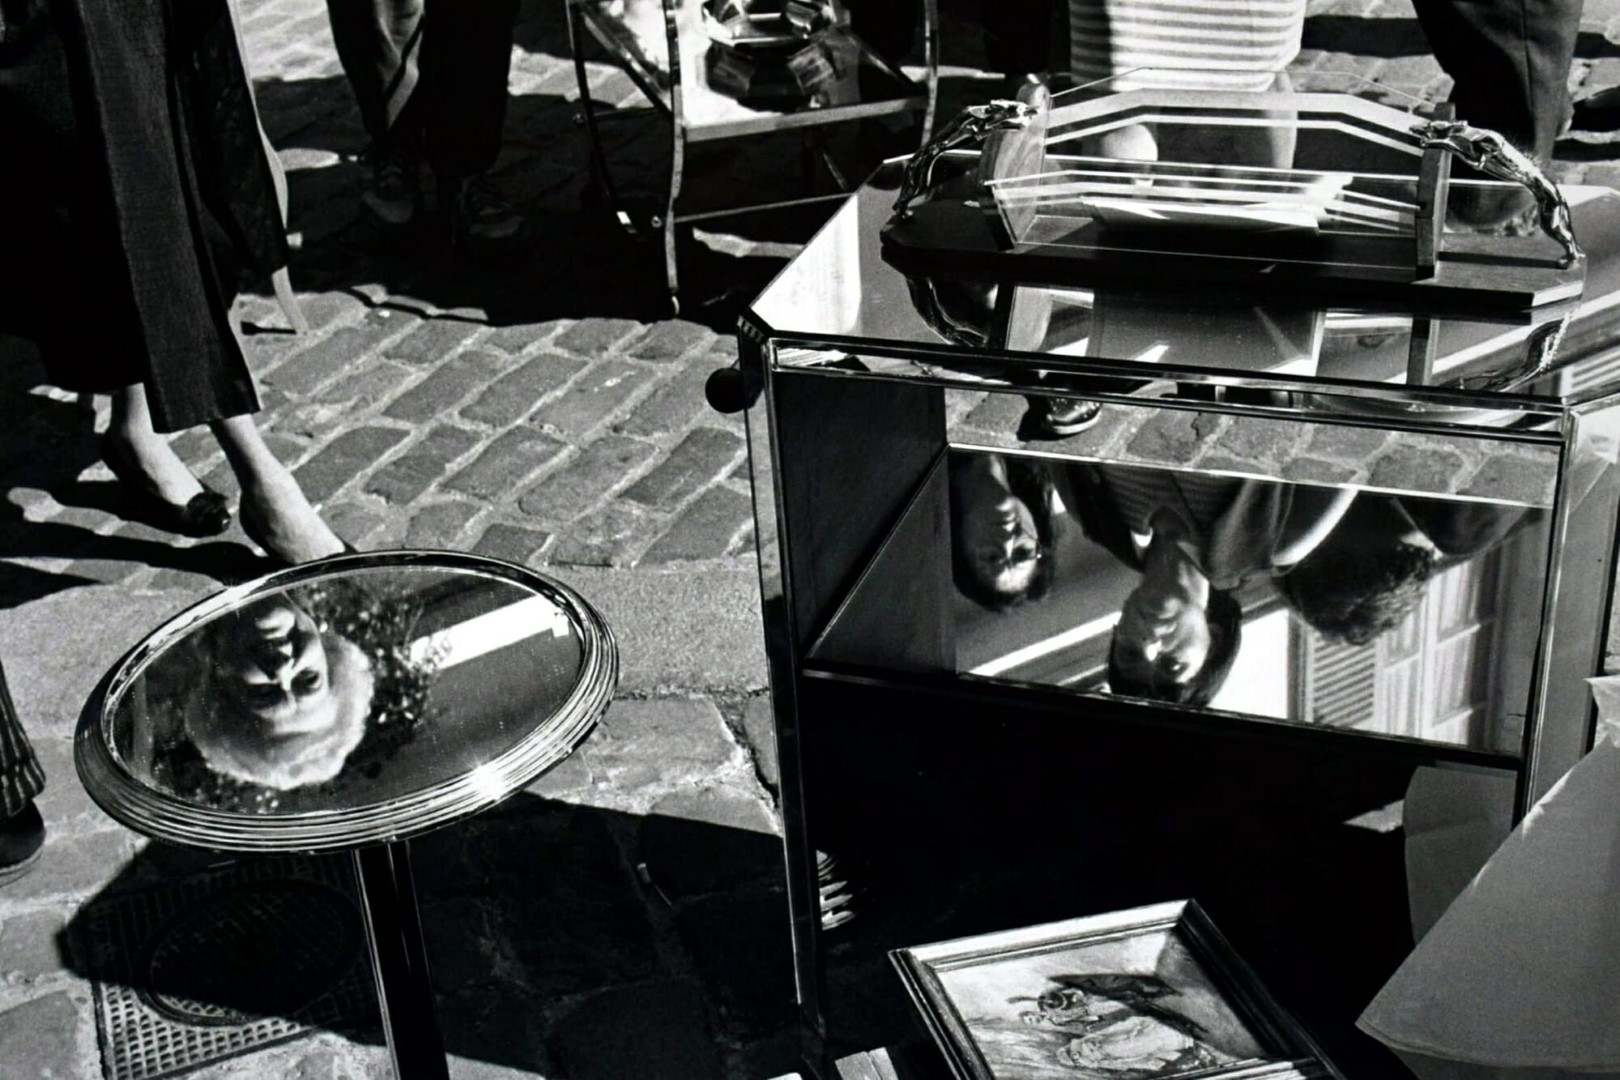 <span style="font-weight:normal;">2 mirrors and 3 heads, Street Sale, Paris, 1988</span>